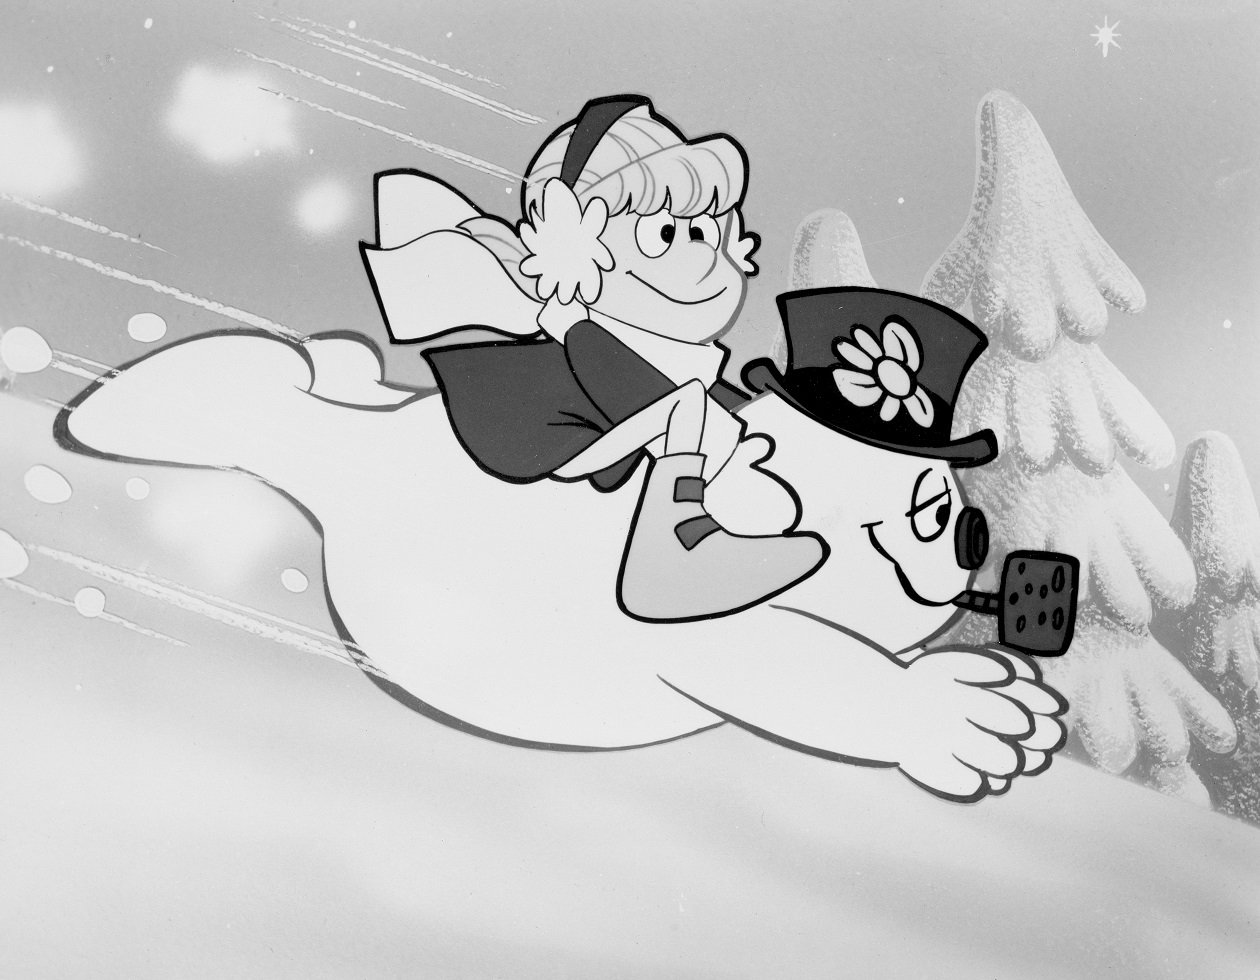 Still from the Frosty the Snowman movie